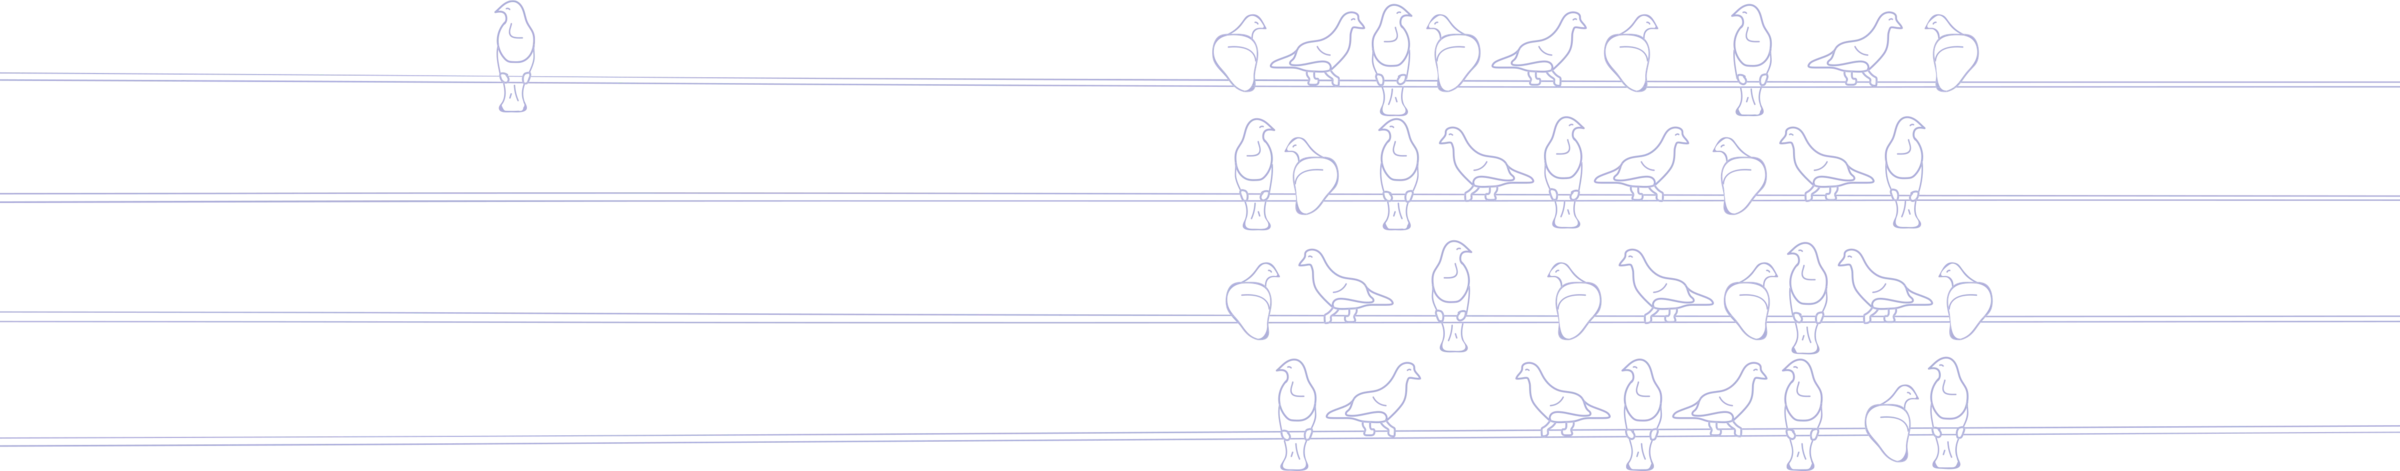 Illustration of birds on a wire. One is off to the side by itself, several others are grouped together on the other side.